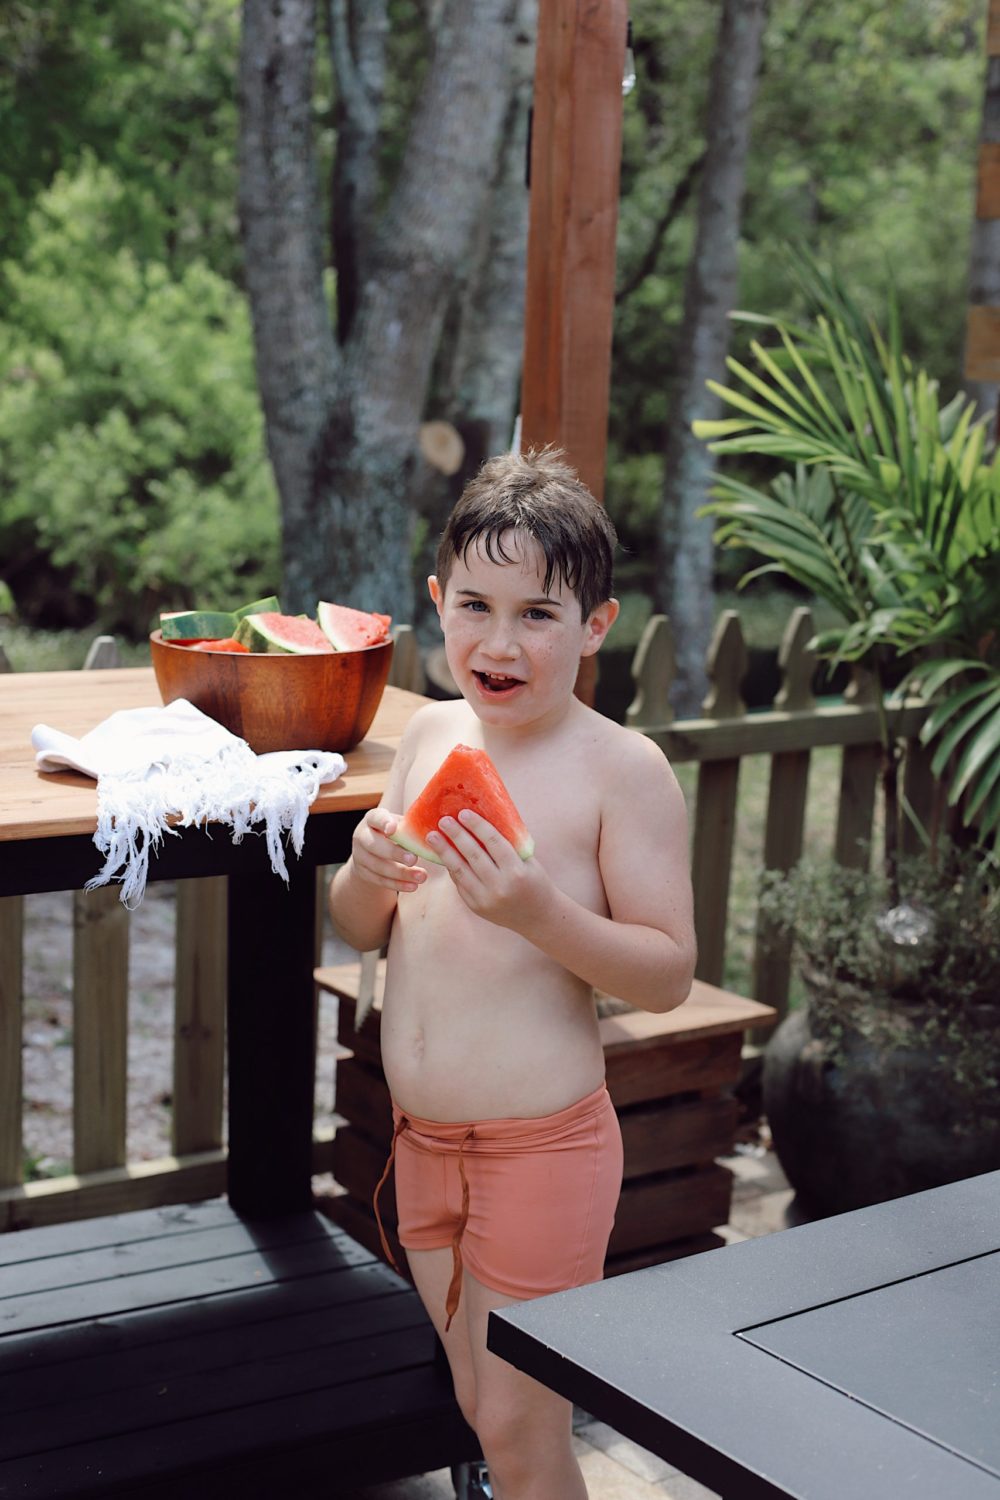 Outdoor Grill Table DIY and Plans for How To Build a Mobile Grill Cart | DIY BBQ Table by popular Florida lifestyle blog, Fresh Mommy Blog: image of a little boy wearing a orang swim suit and standing in front of a DIY BBQ table while he eats a slice of watermelon. 